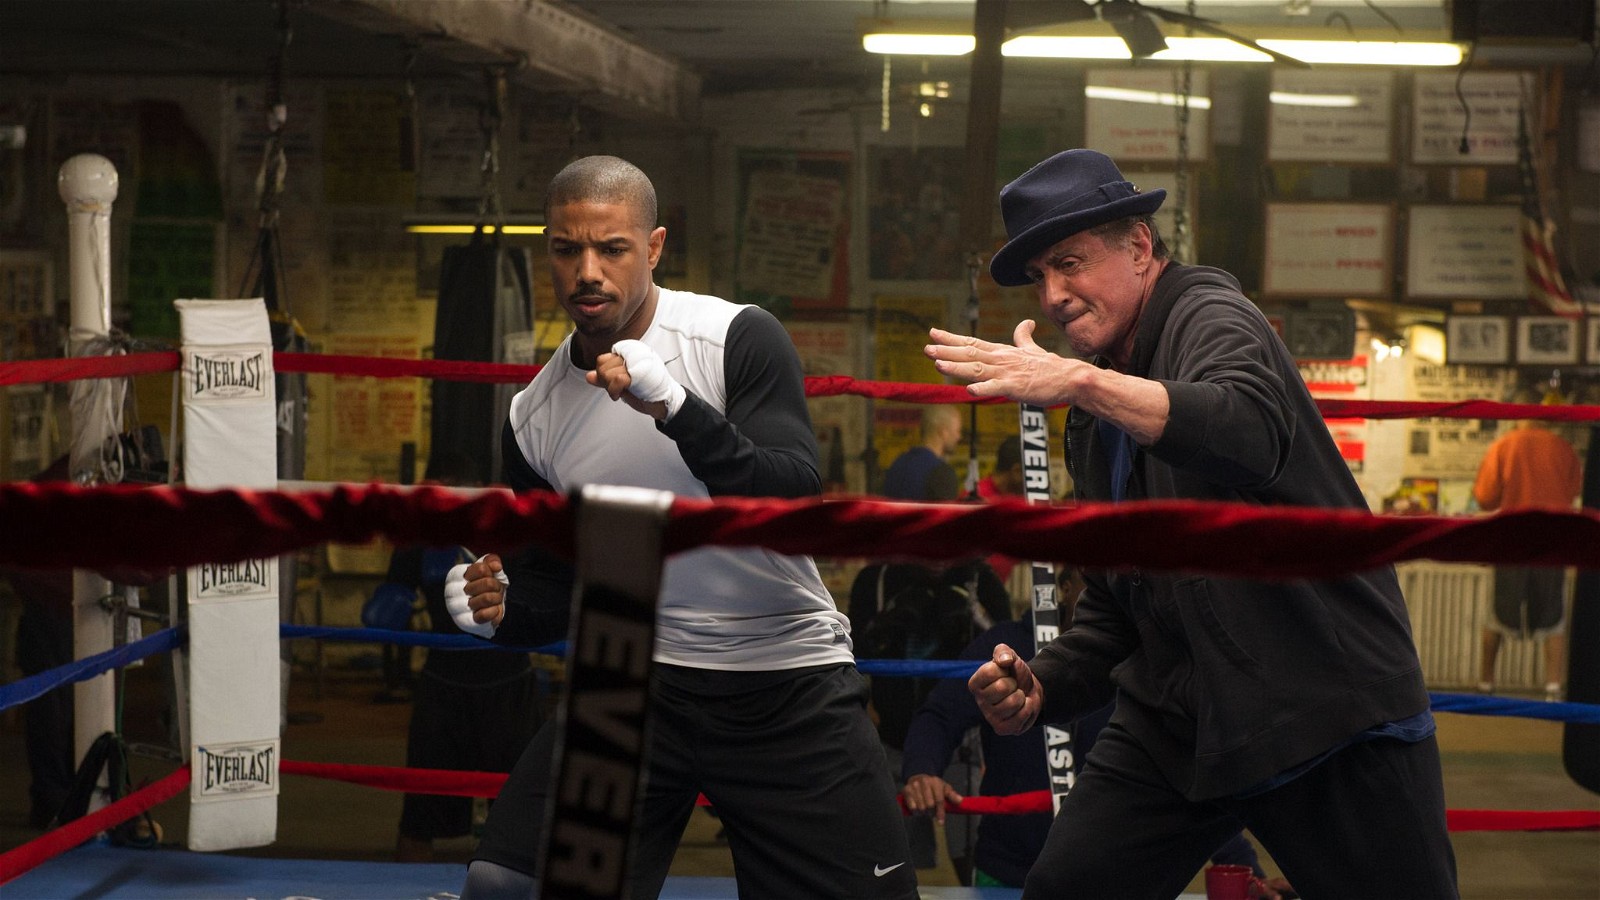 Michael B. Jordan and Sylvester Stallone in Creed